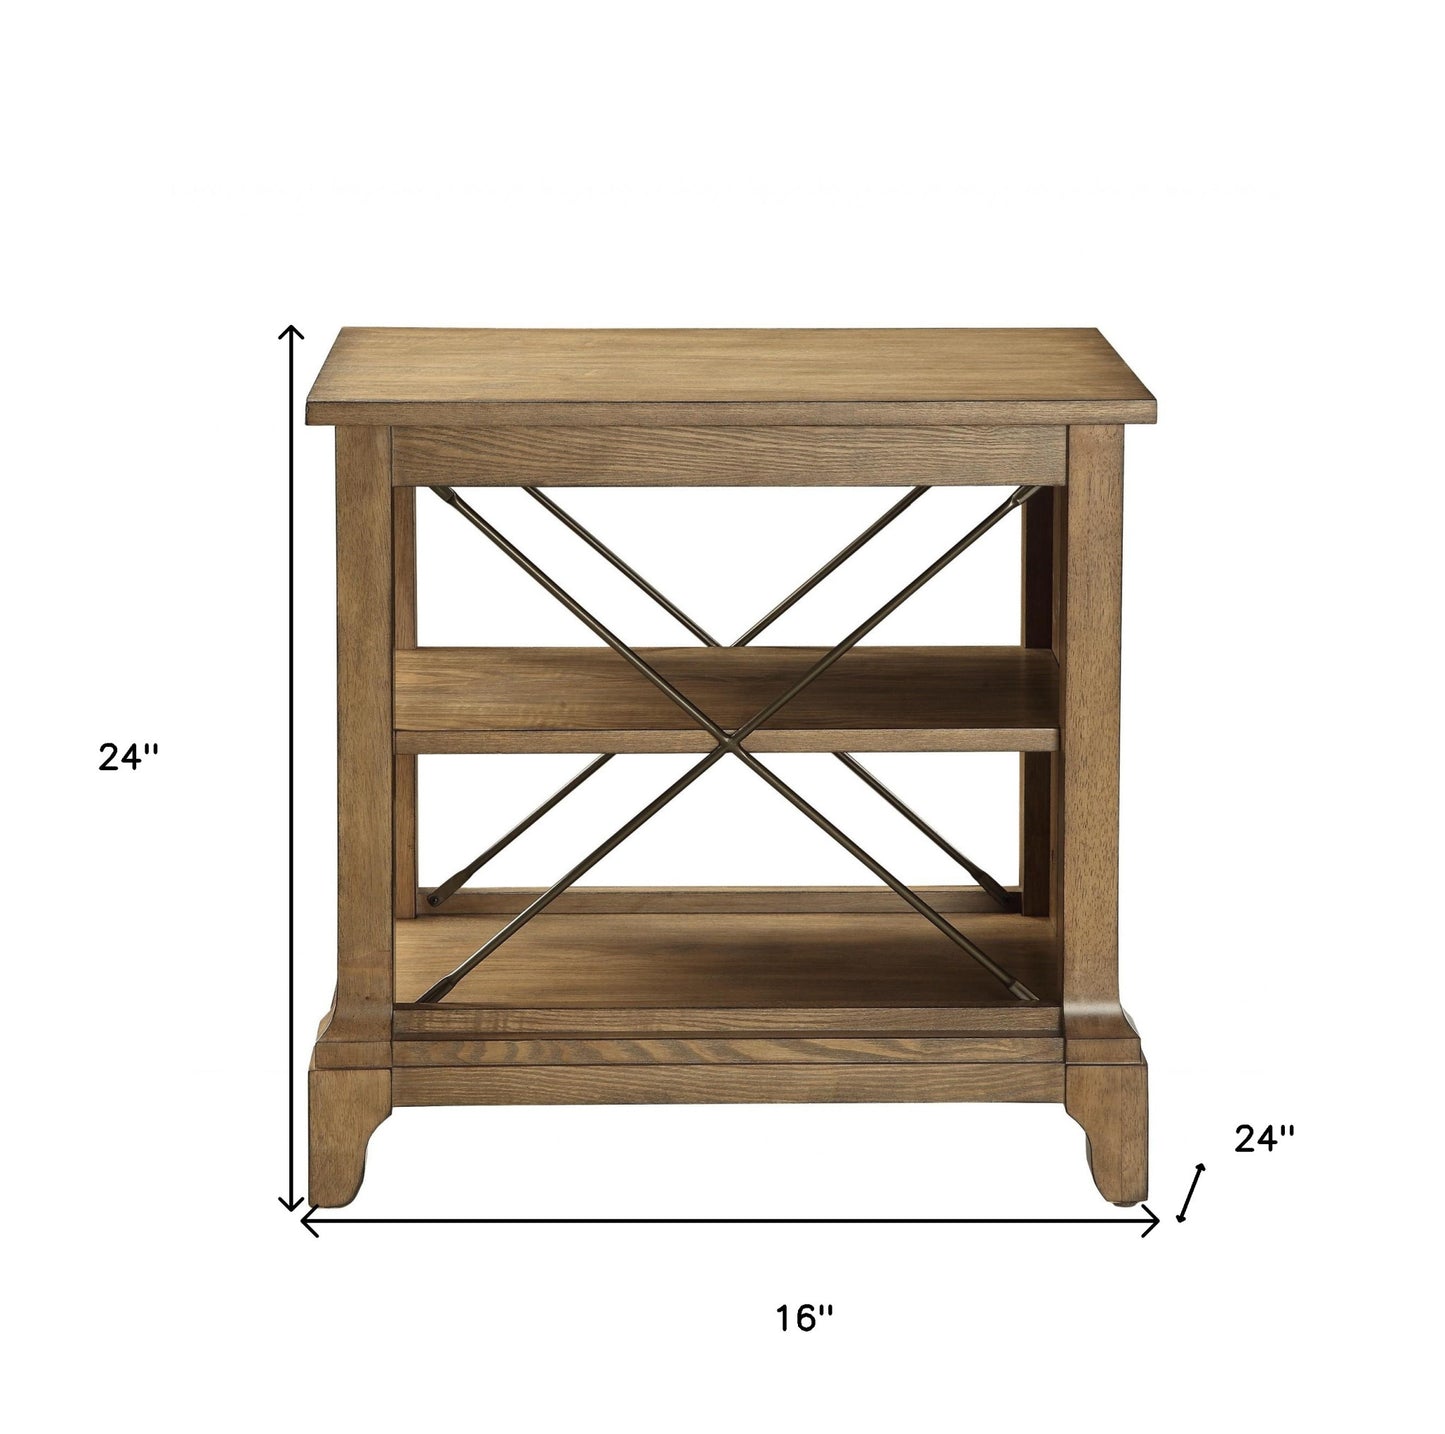 24" Oak And Brown End Table With Two Shelves